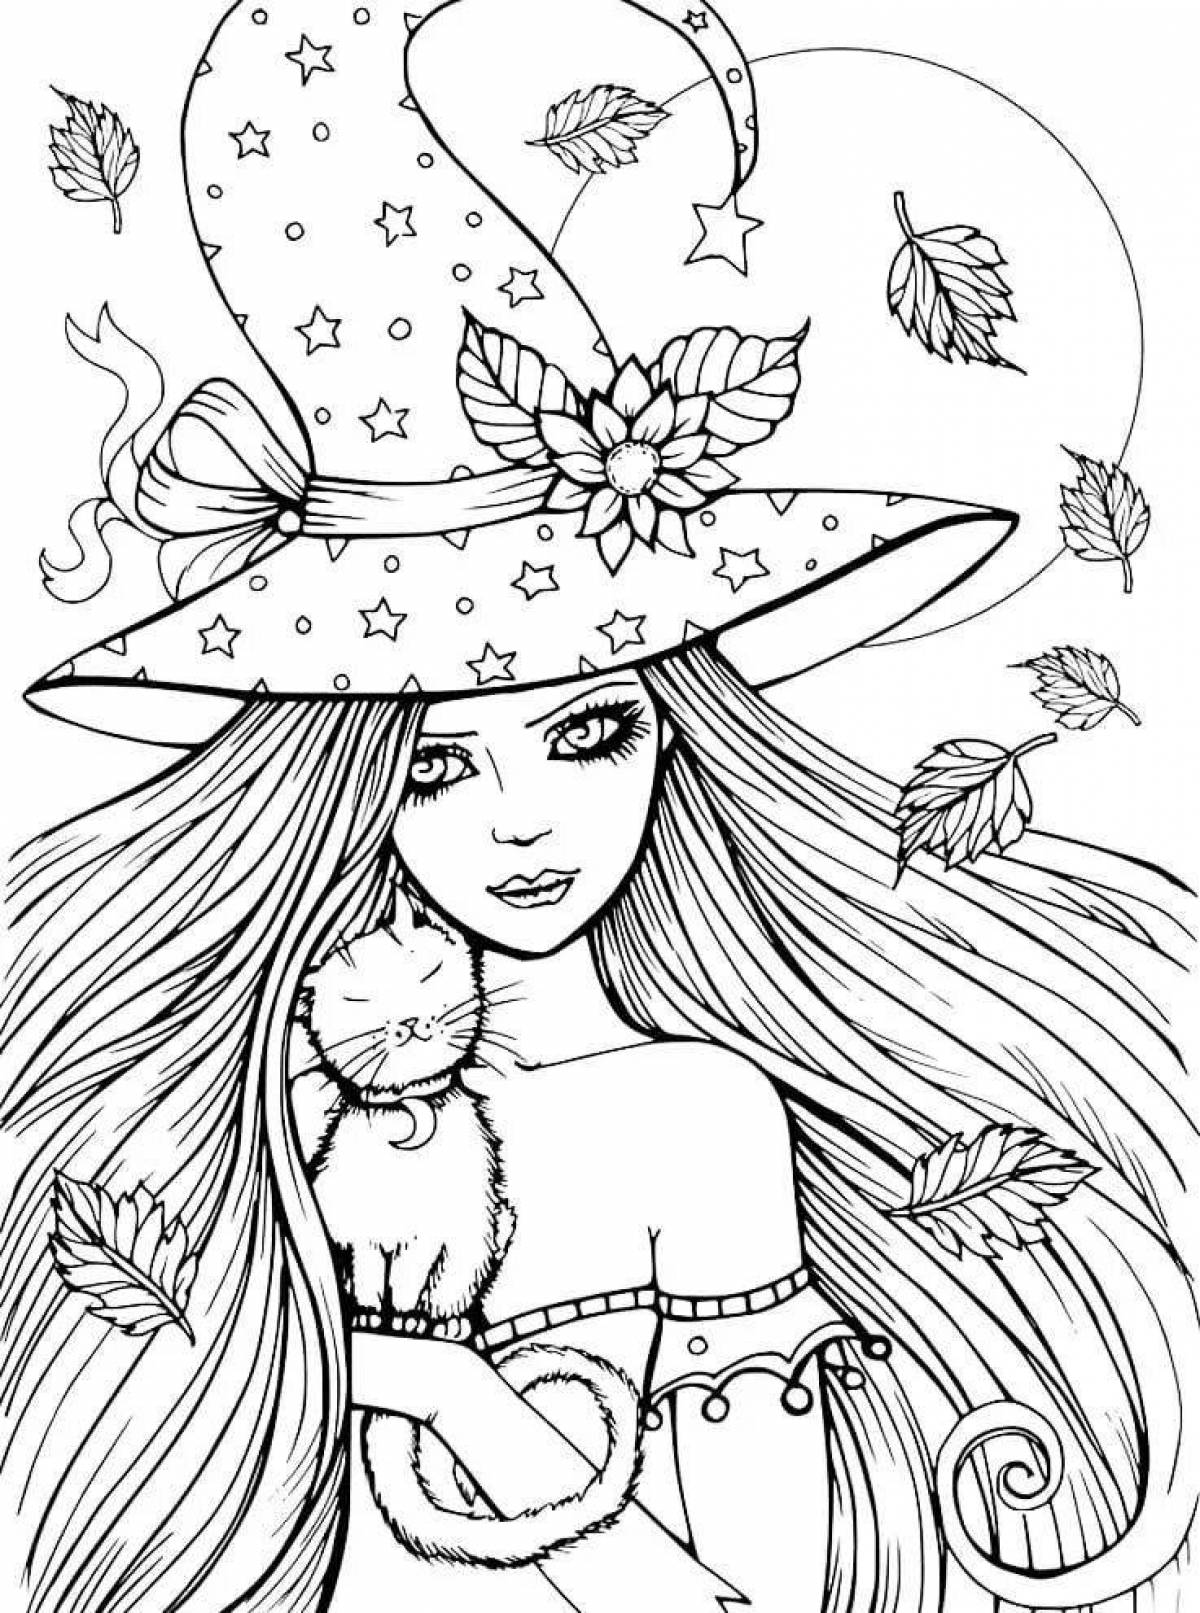 Amazing coloring pages for girls 8 years old